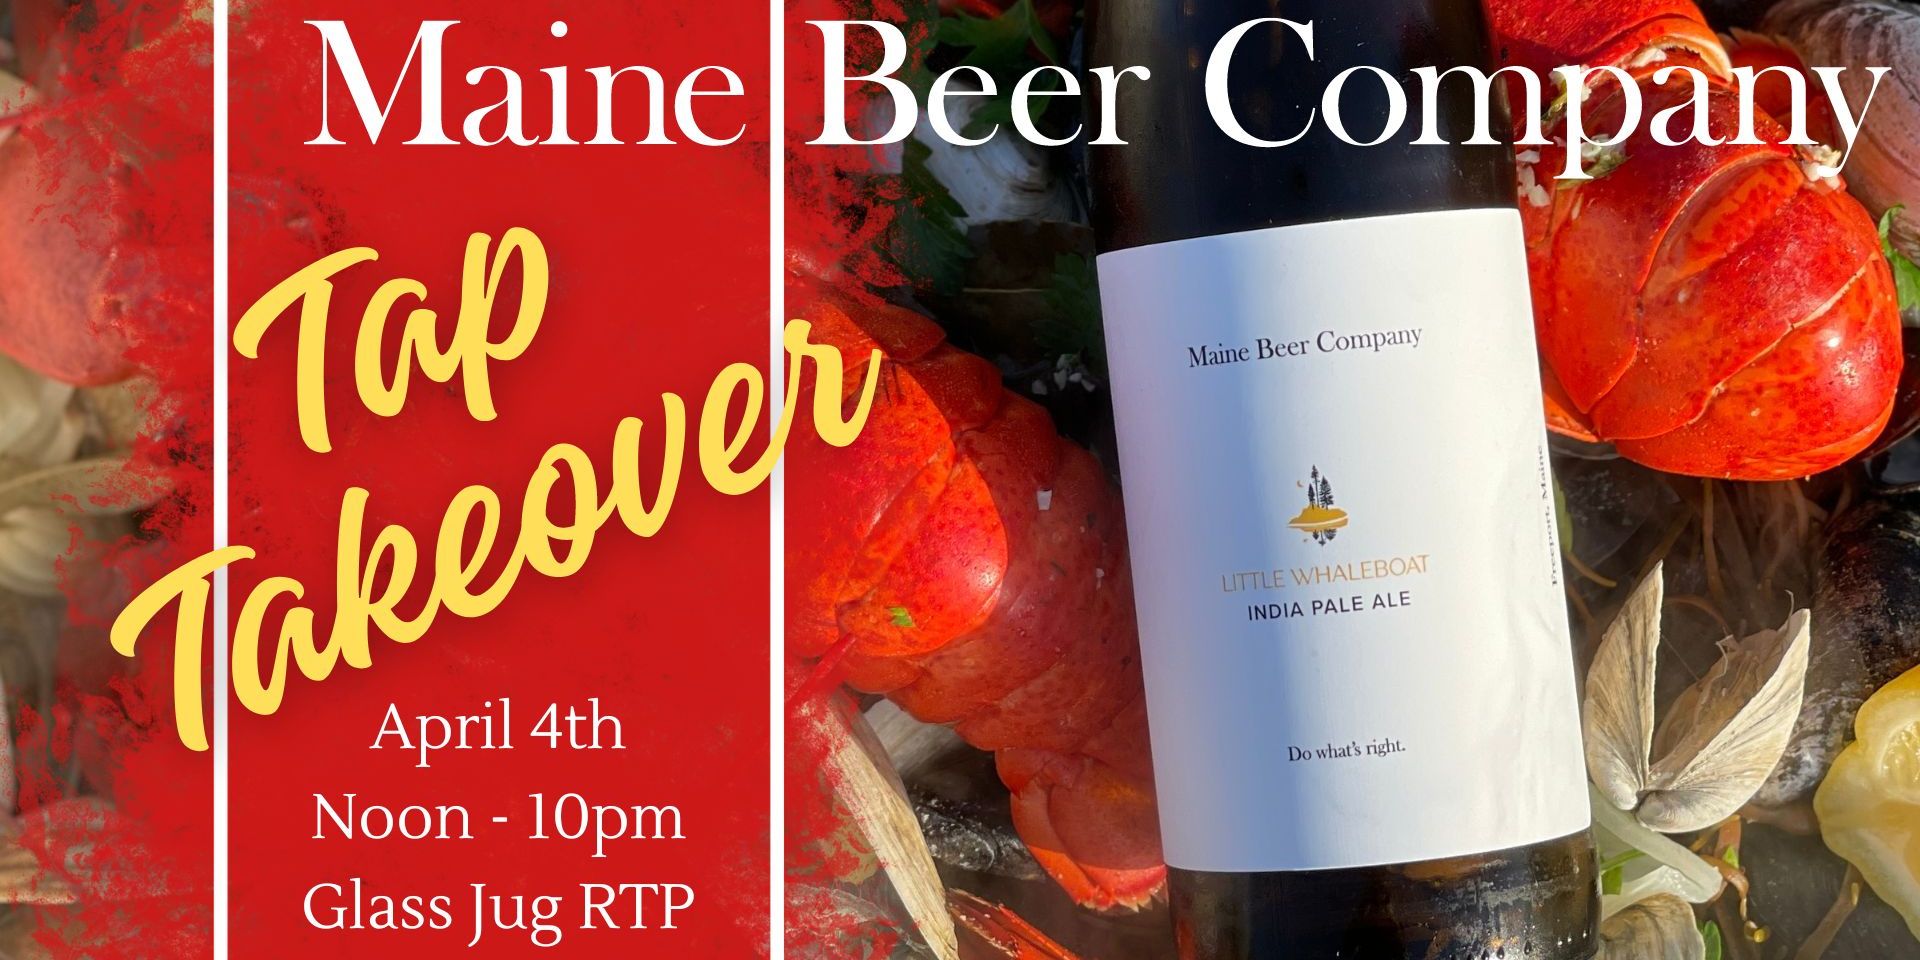 Maine Beer Company Tap Takeover promotional image